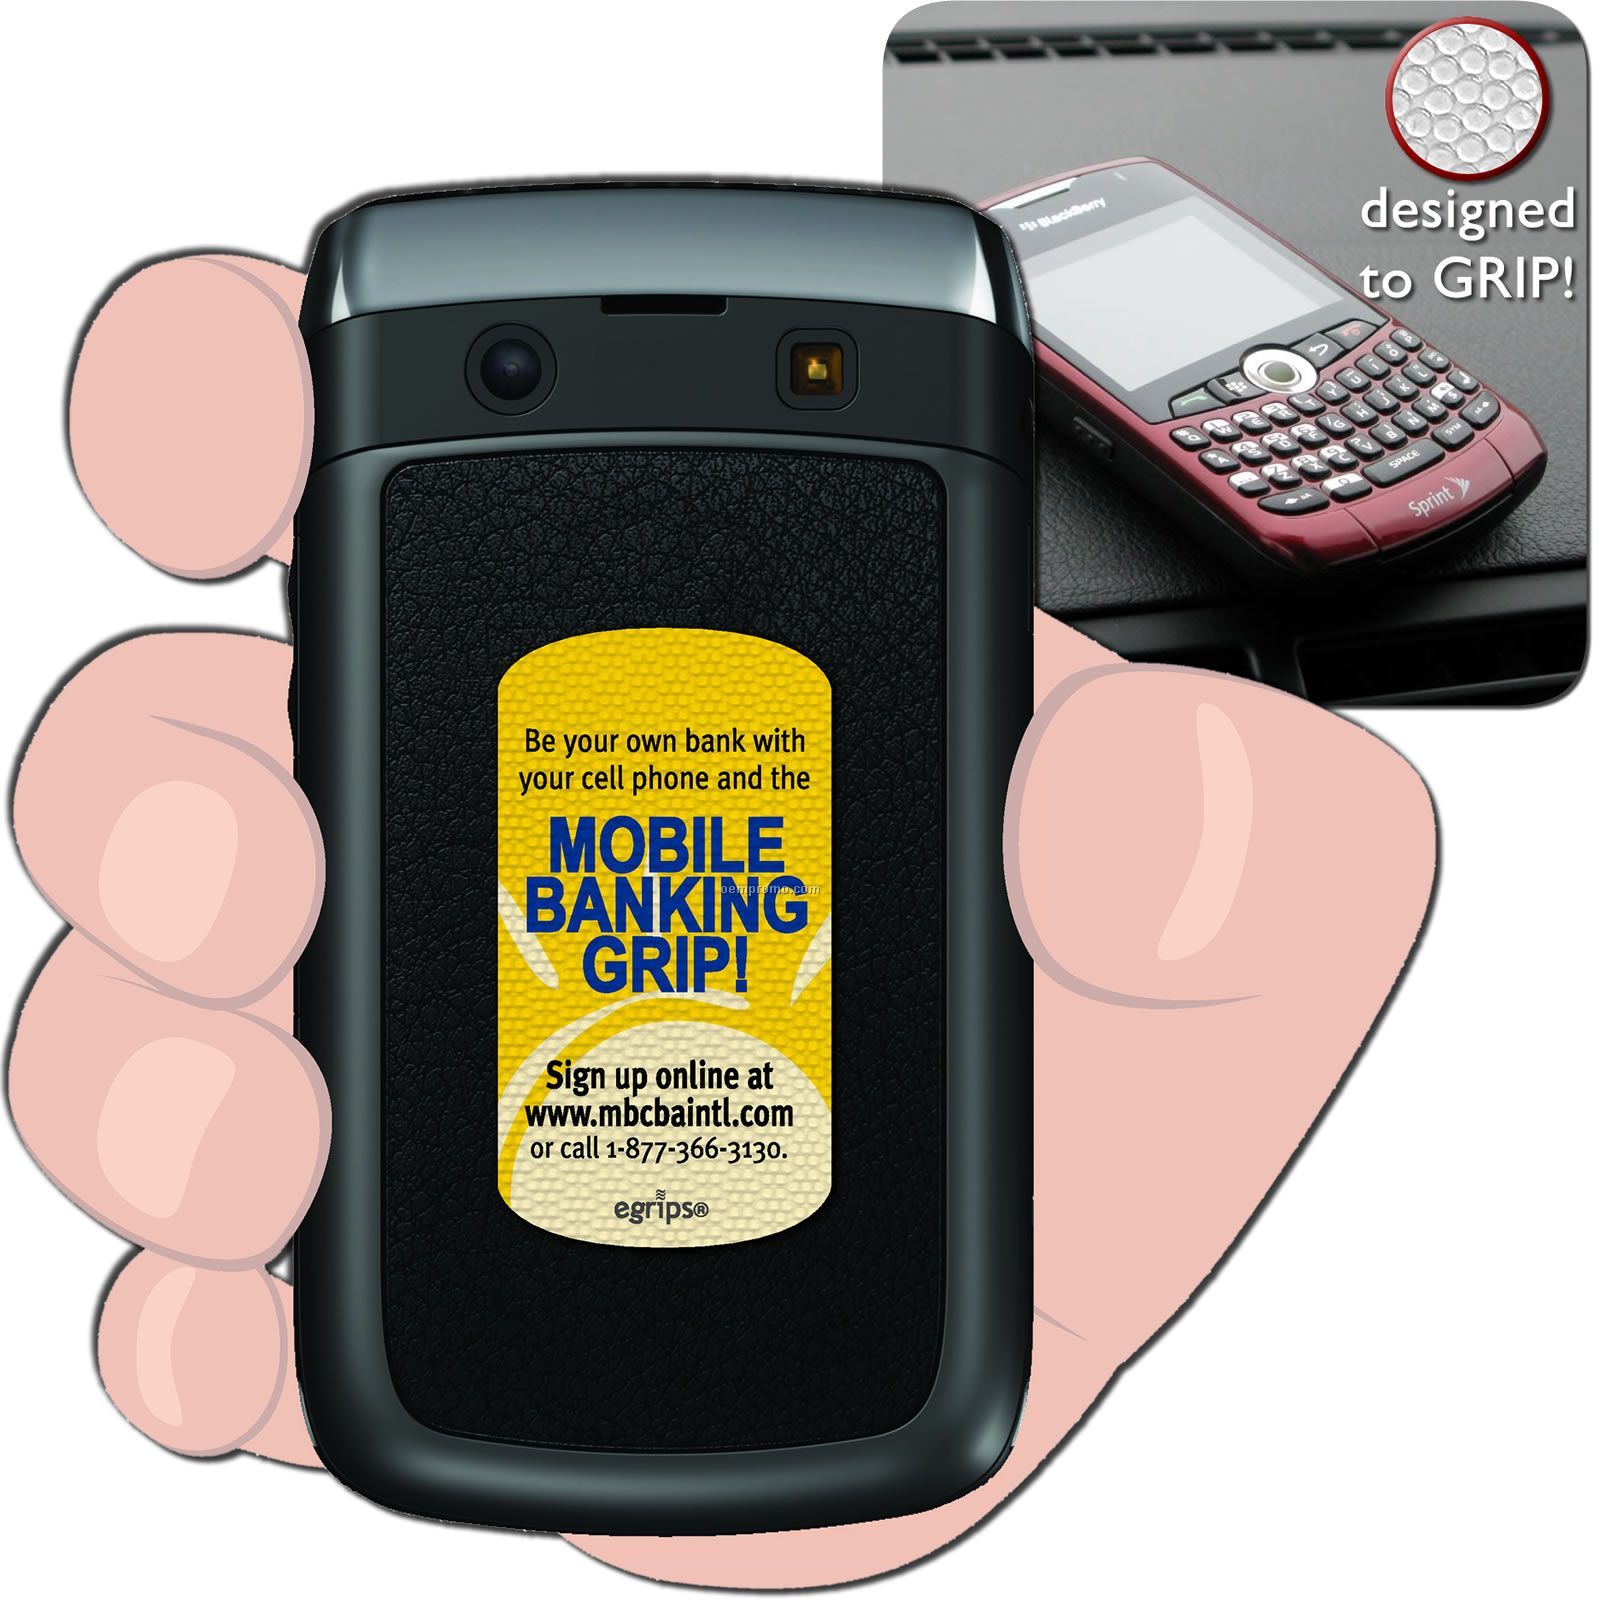 Egrips Non-slip Strips - The World's Most Advanced Cell Phone Grip